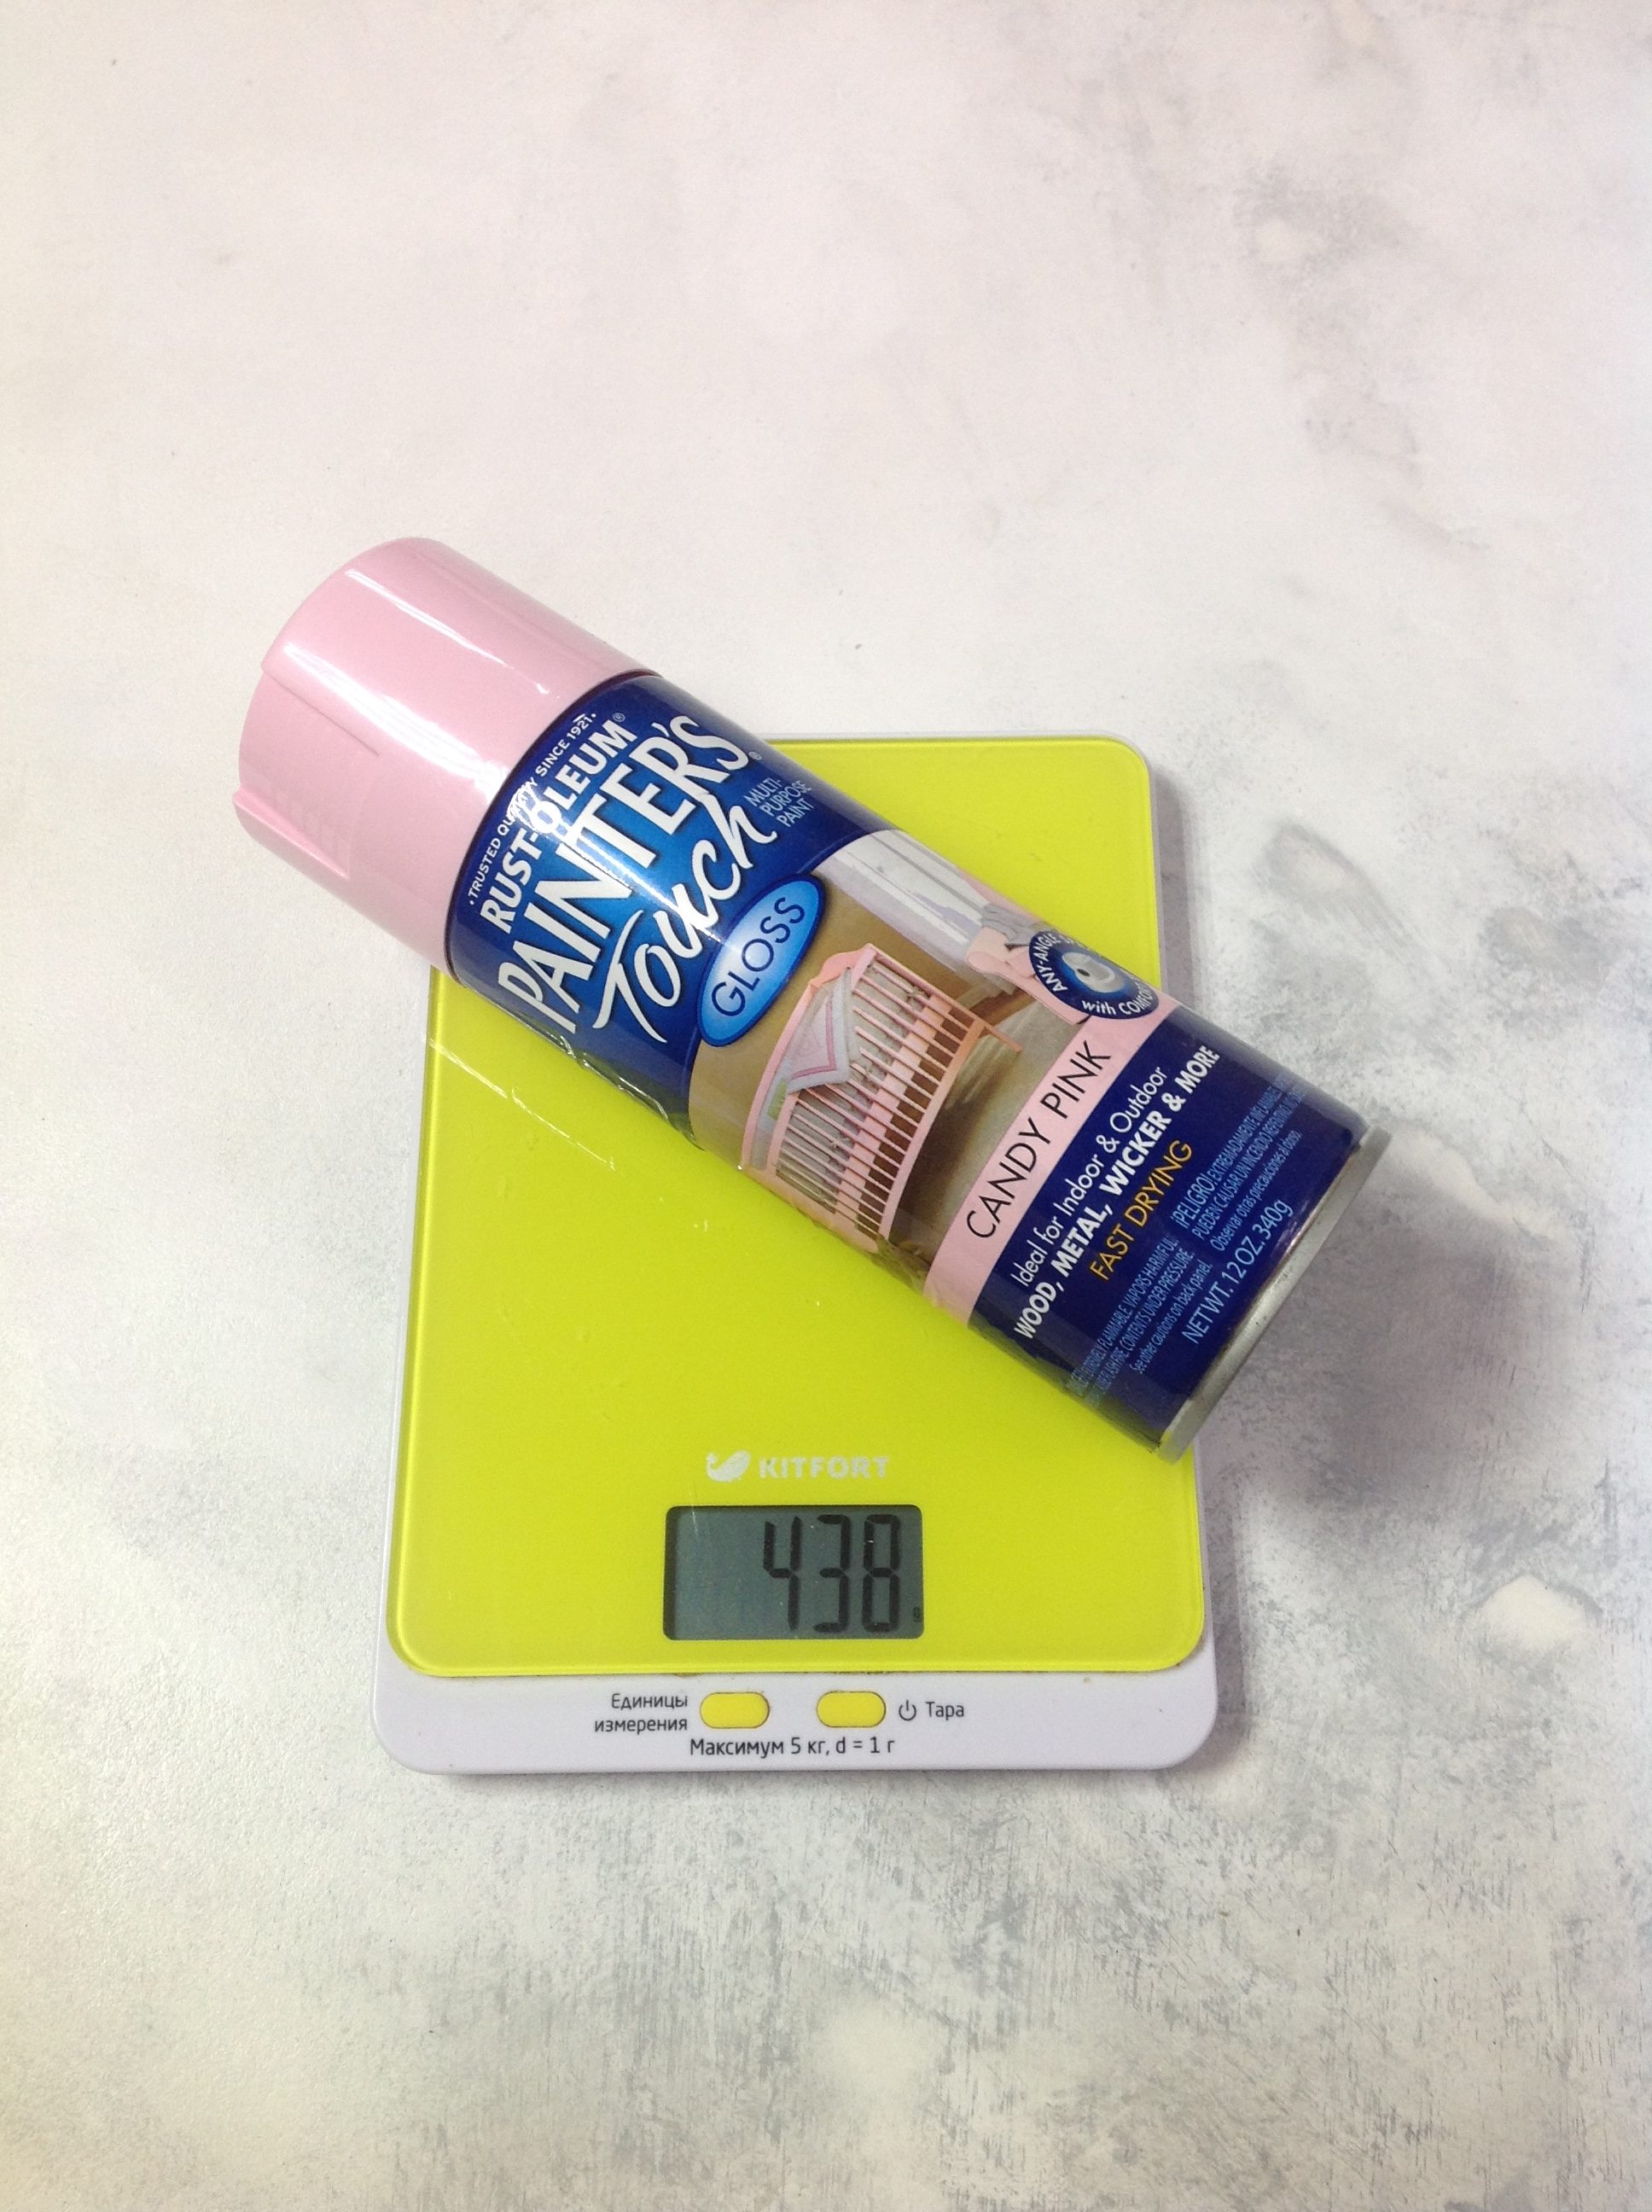 How much does a can of spray paint weigh?